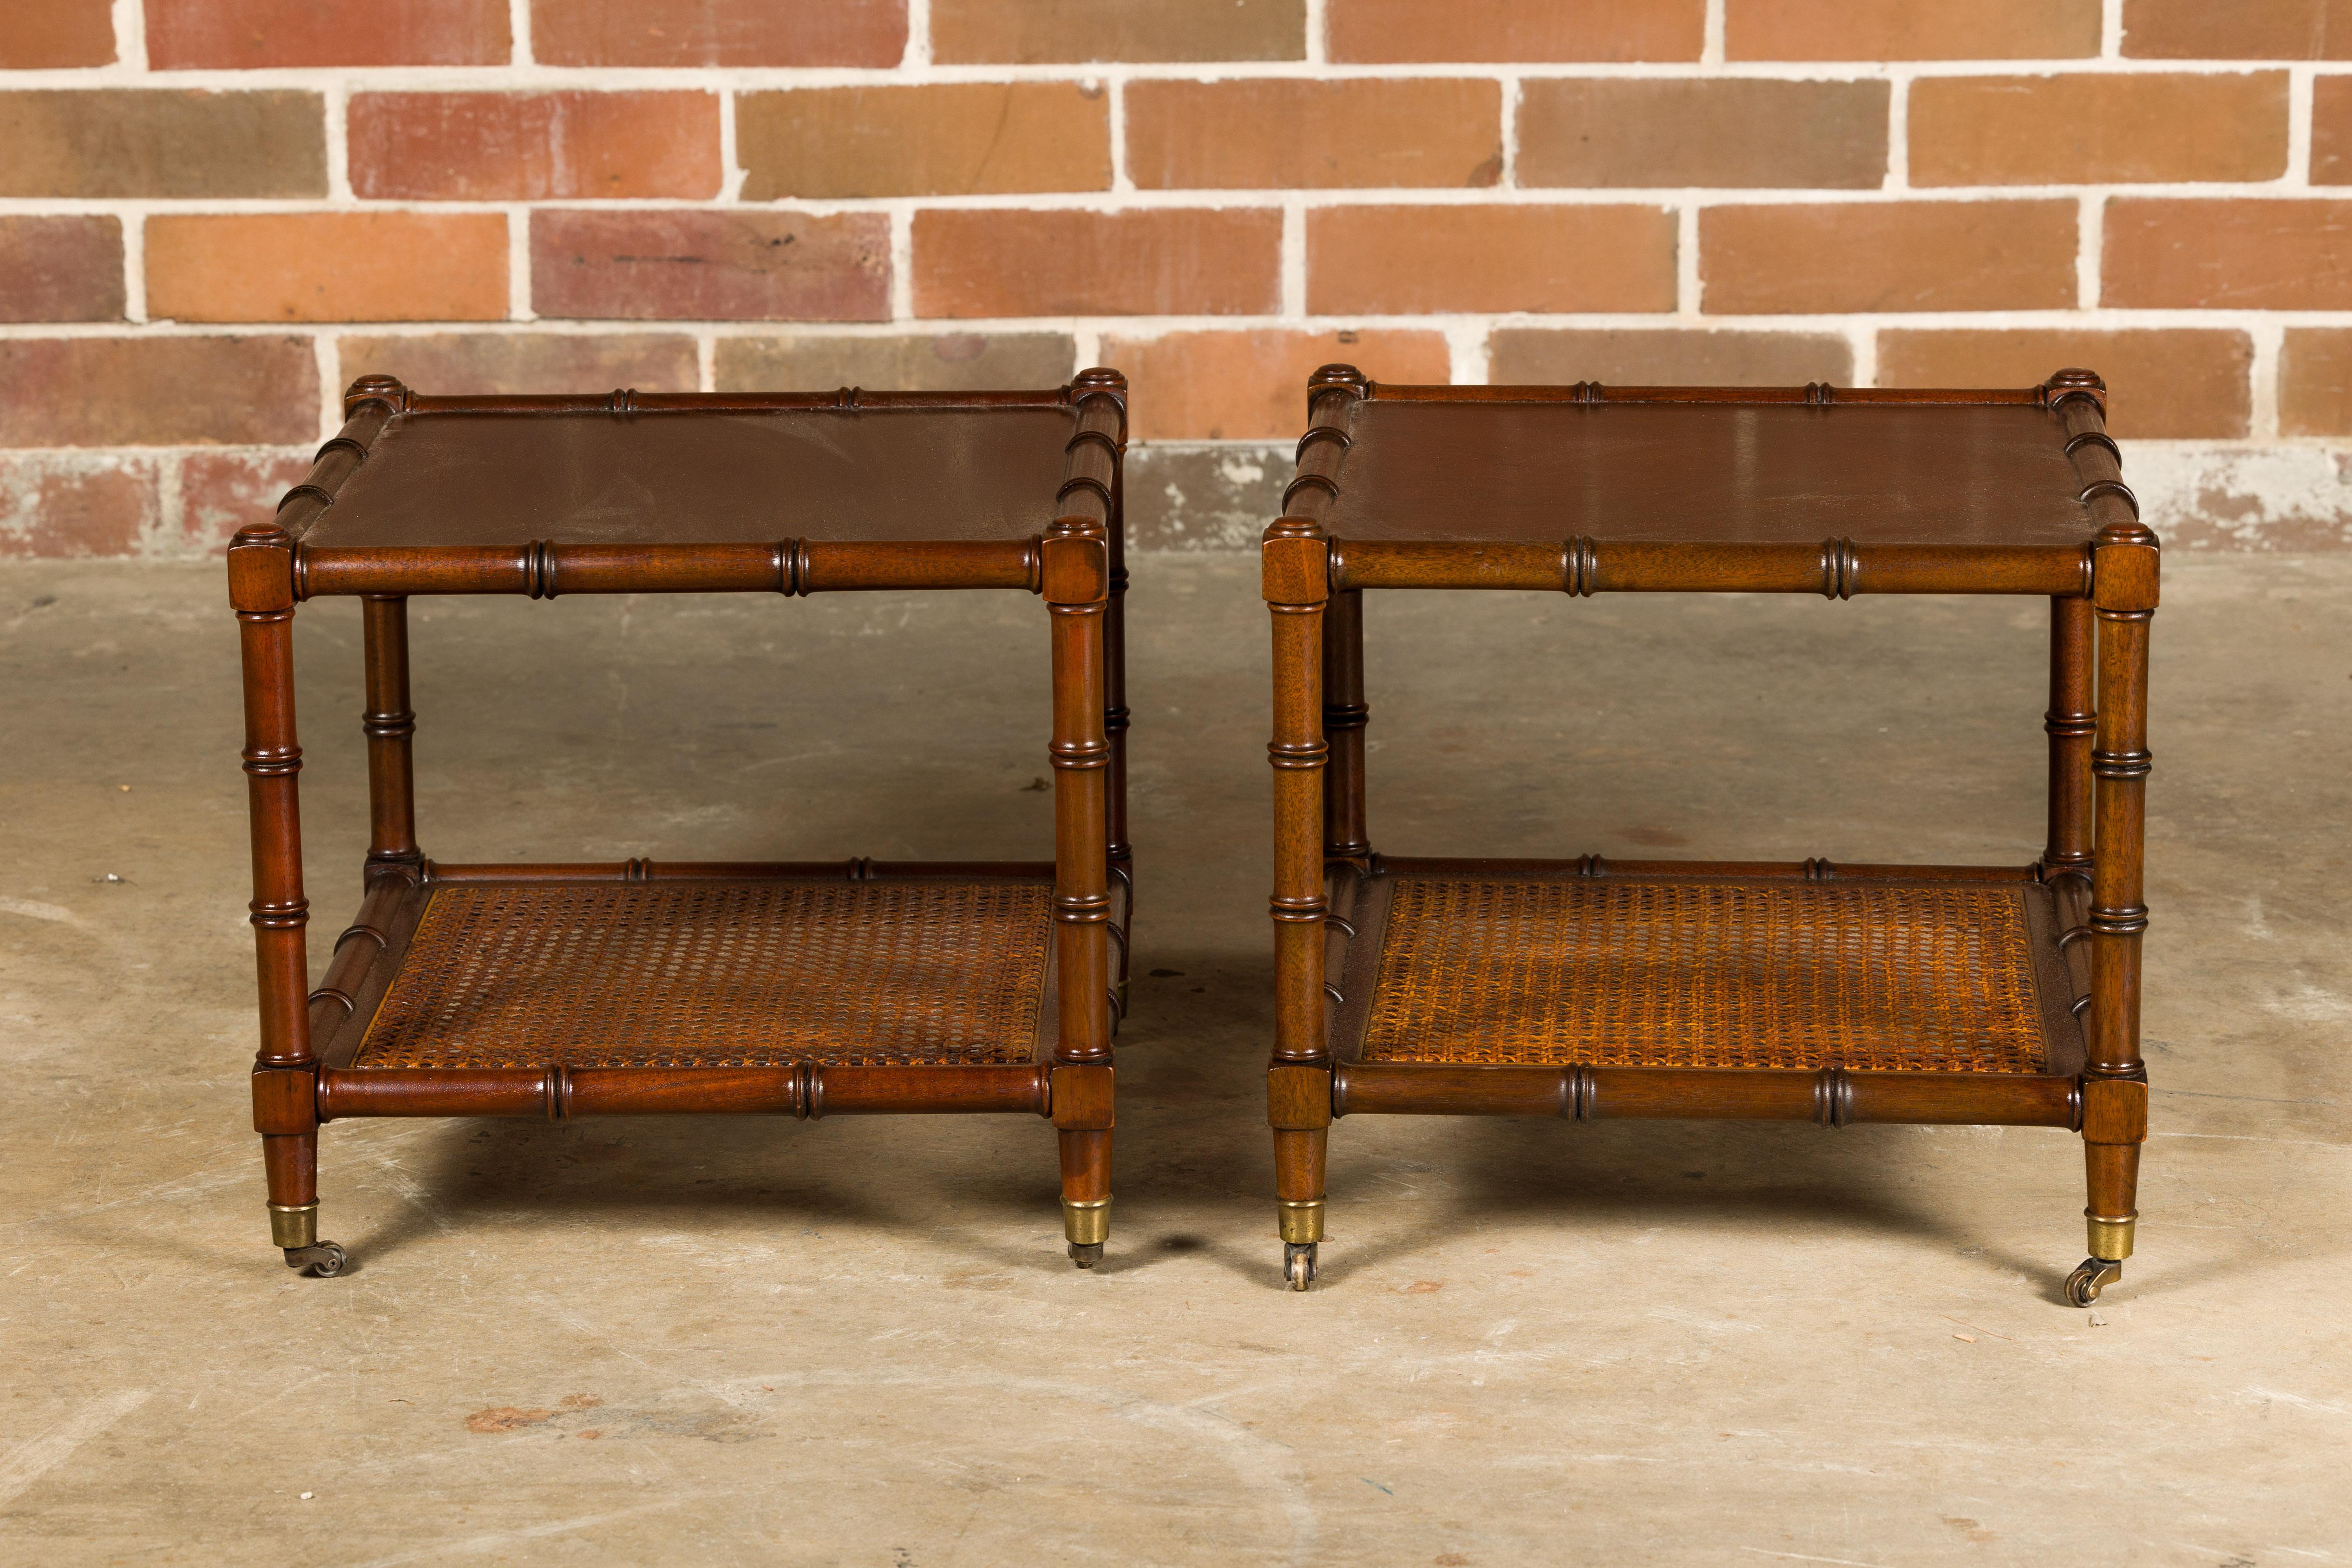 20th Century English Midcentury Walnut, Faux Bamboo and Cane Low Side Tables on Casters, Pair For Sale